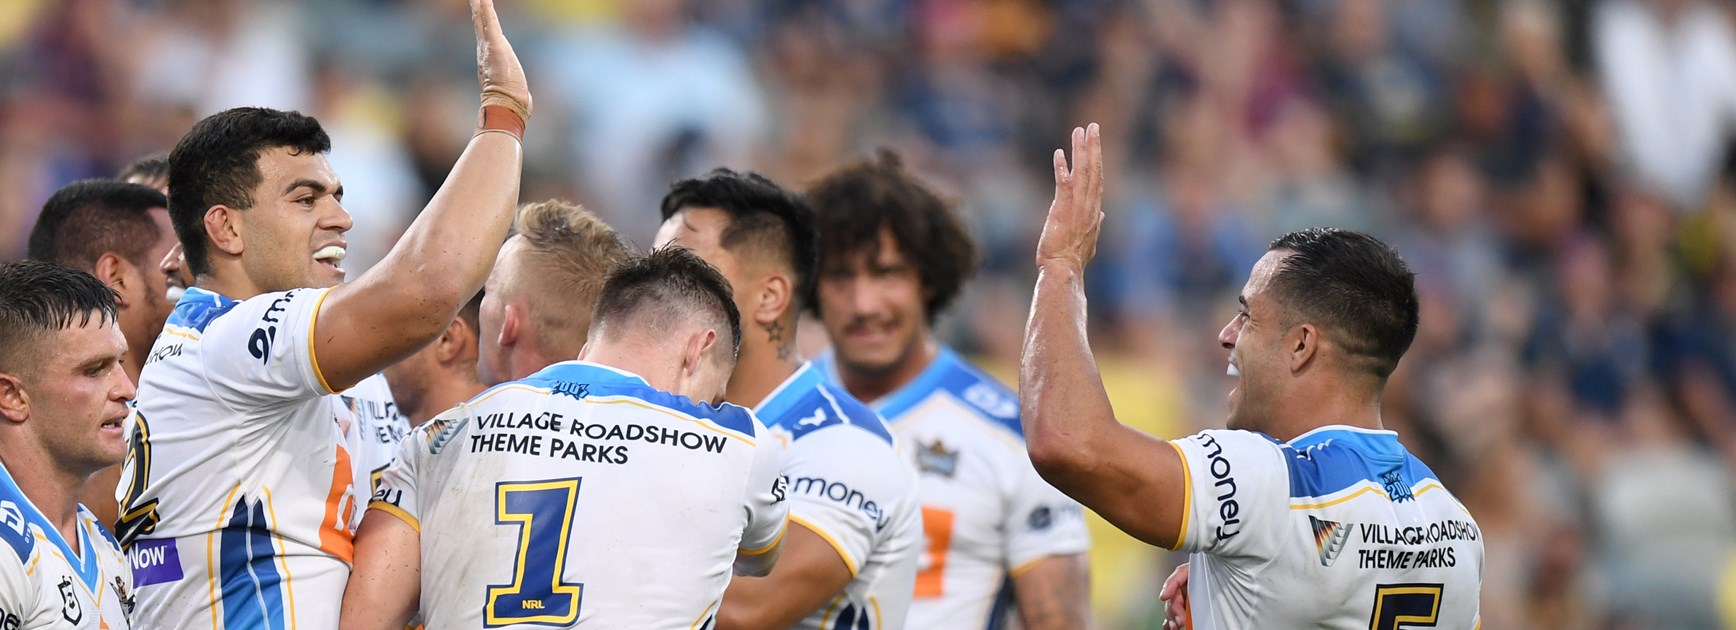 Gold Coast attack fires as Titans beat Cowboys in Queensland Derby